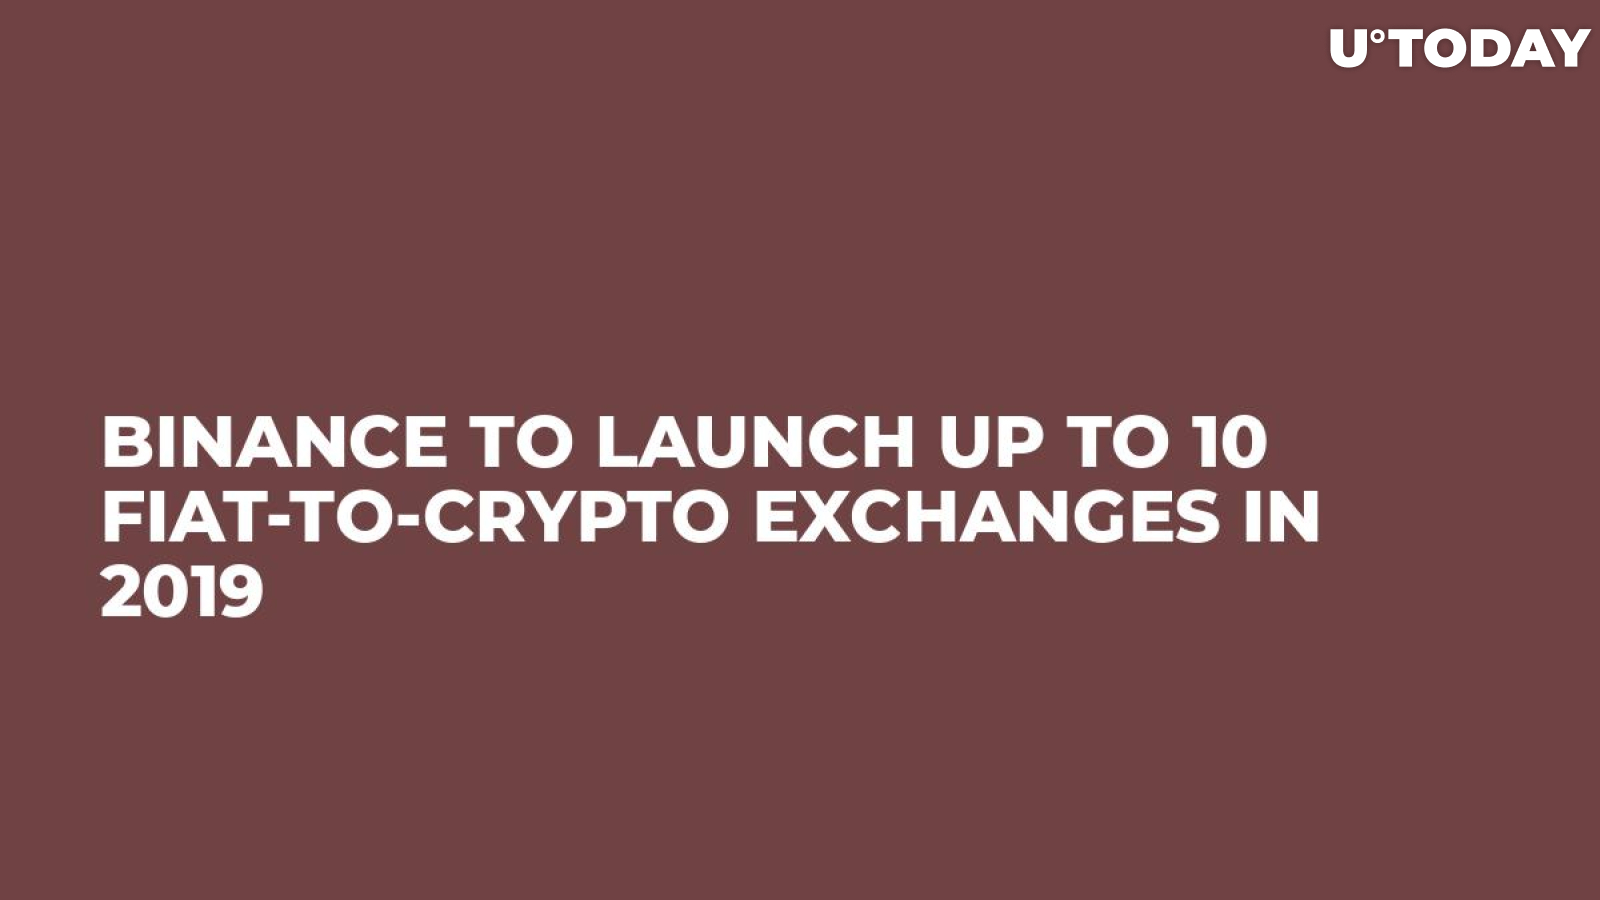 Binance To Launch Up To 10 Fiat-to-Crypto Exchanges in 2019 